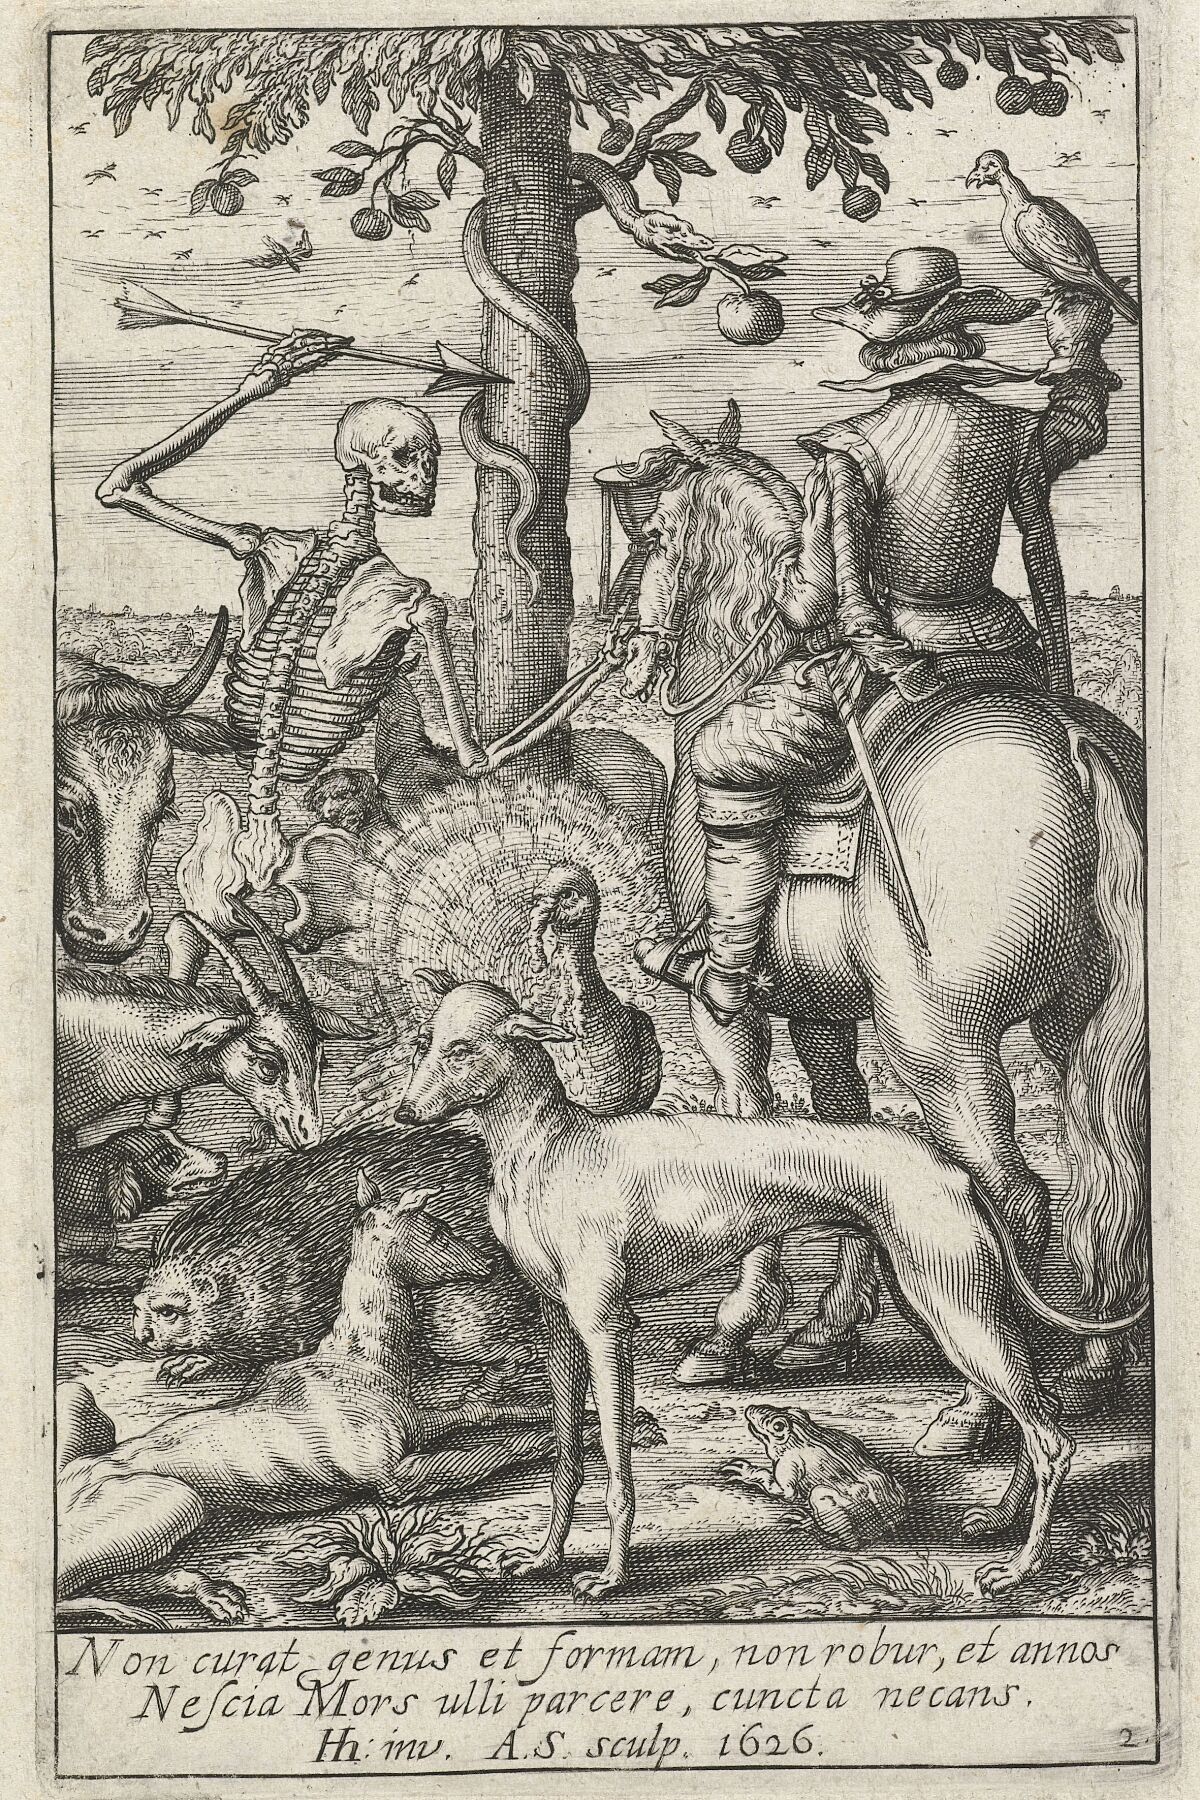 Skeleton with arrow and falconer, in the midst of animals, Andries Jacobsz. Stock, after Hendrick Hondius (I), after Teodoro Filippo di Liagno, 1626